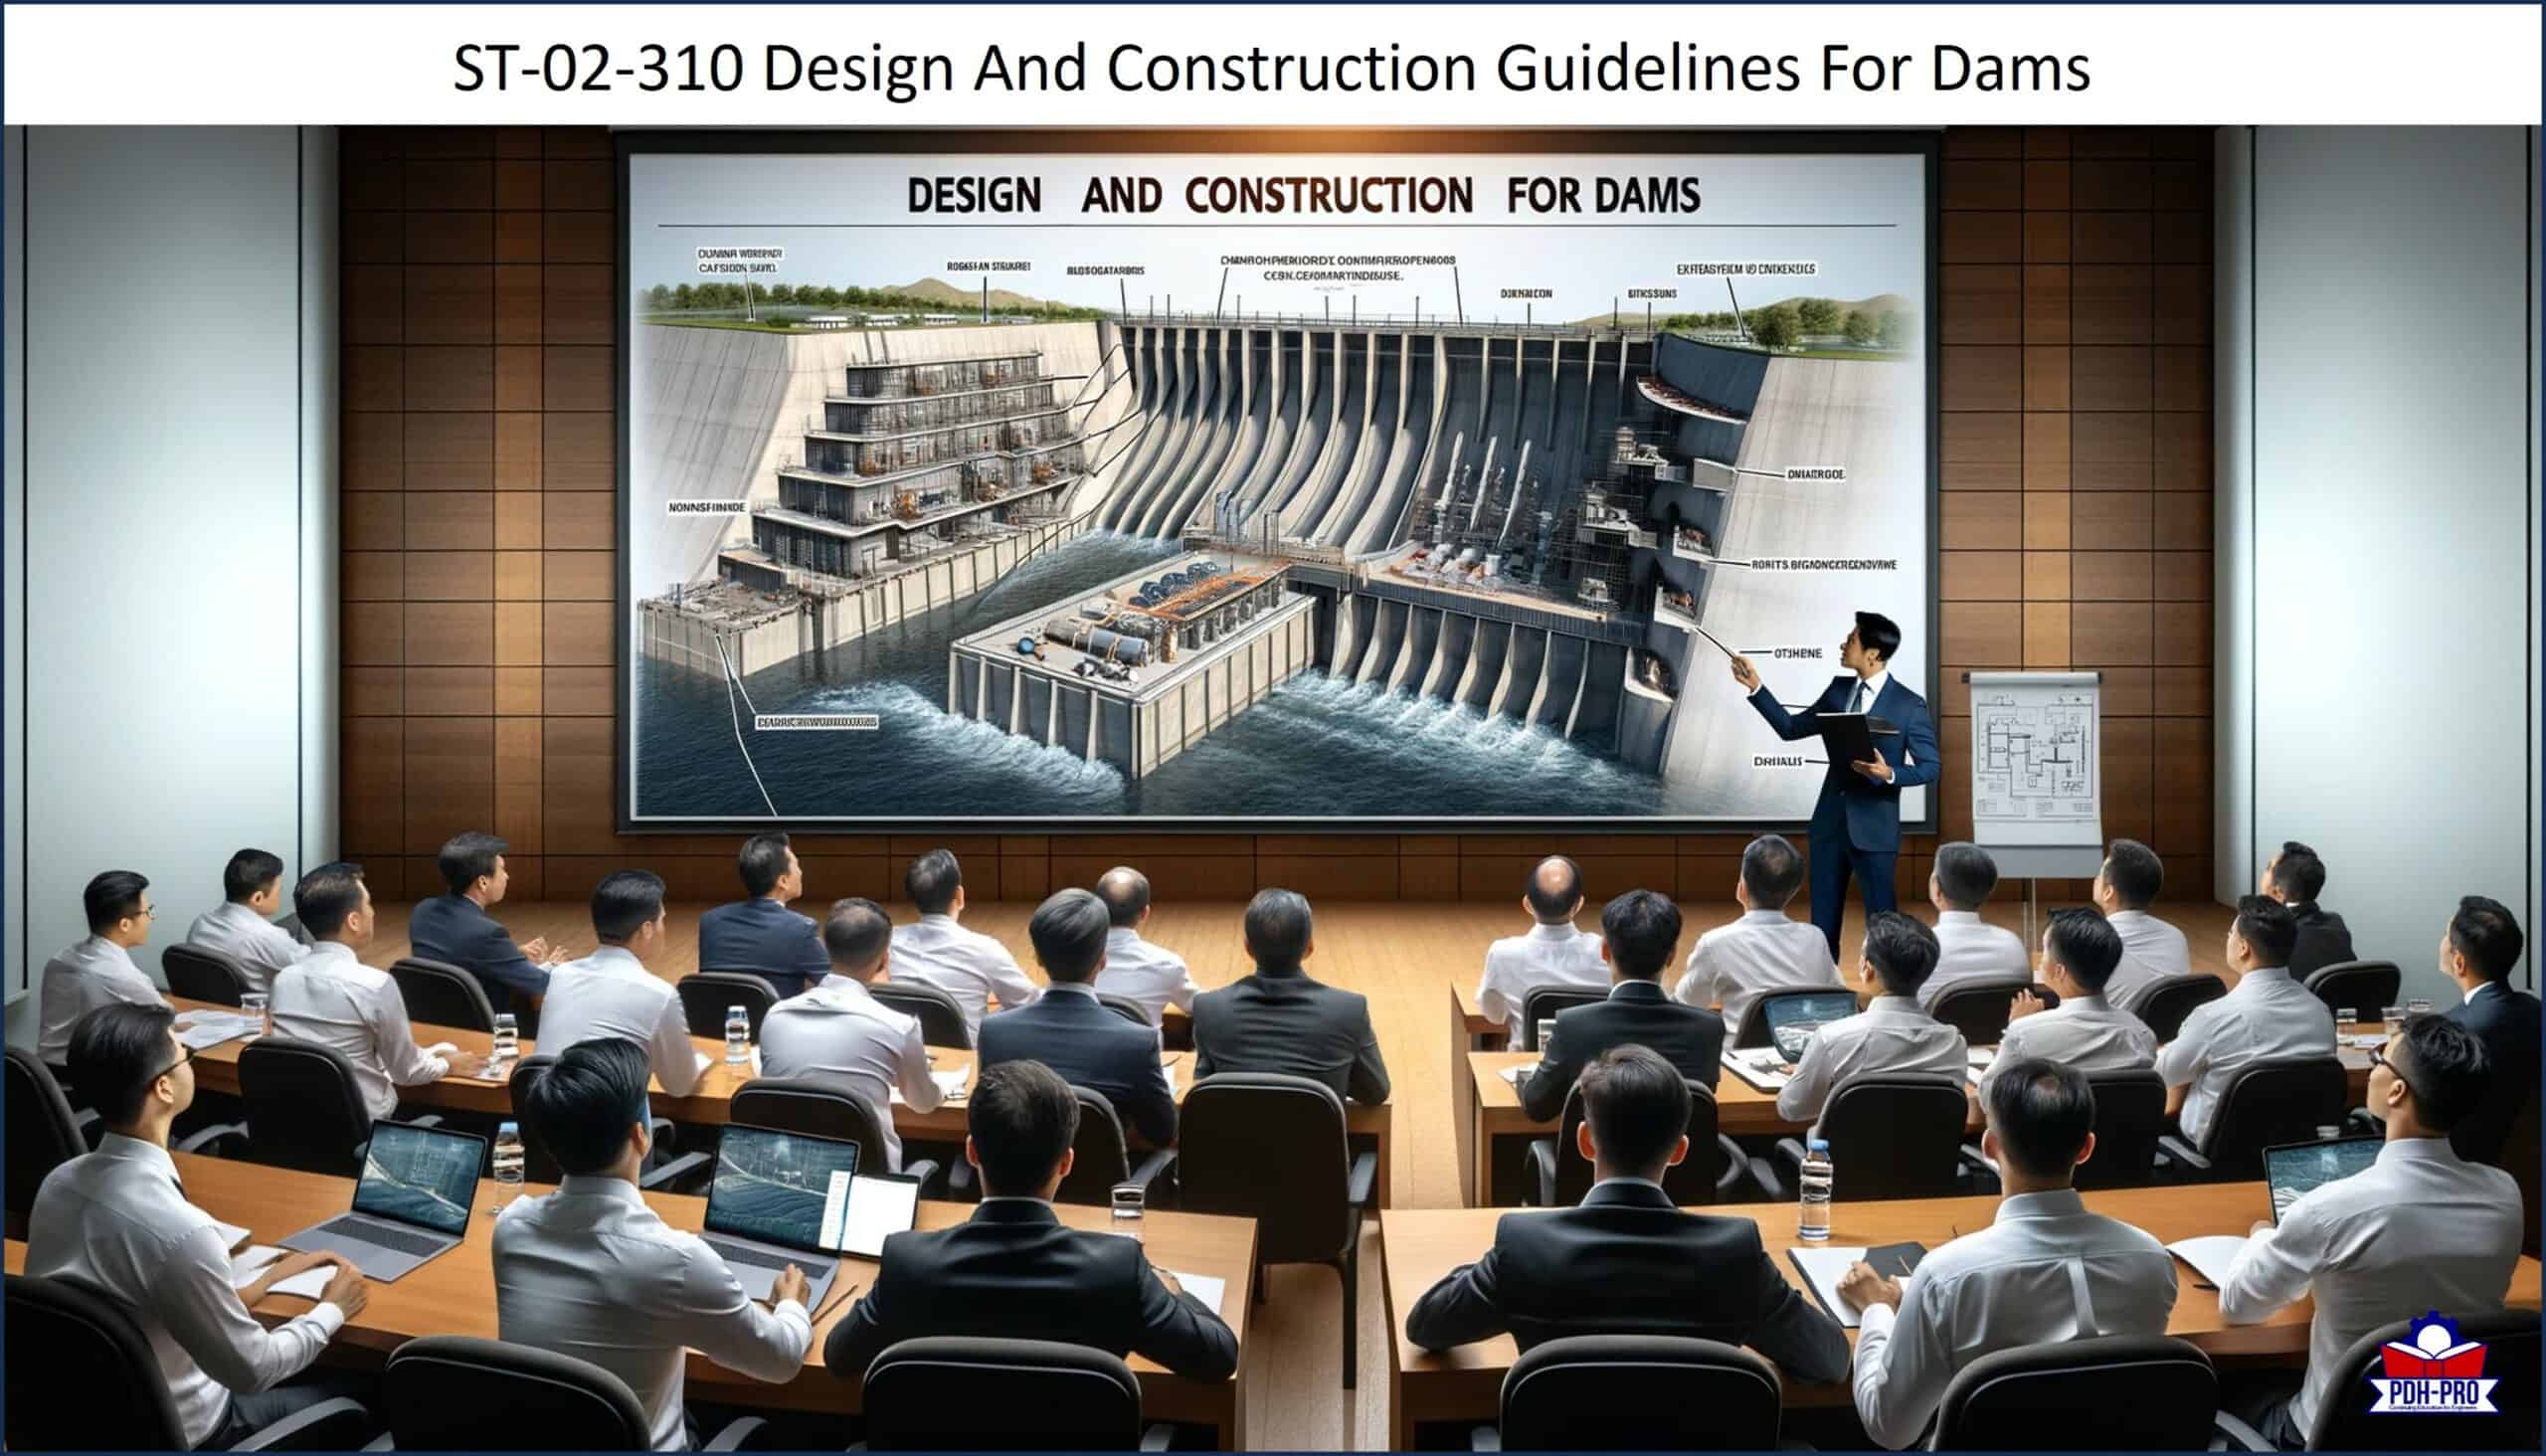 Design And Construction Guidelines For Dams